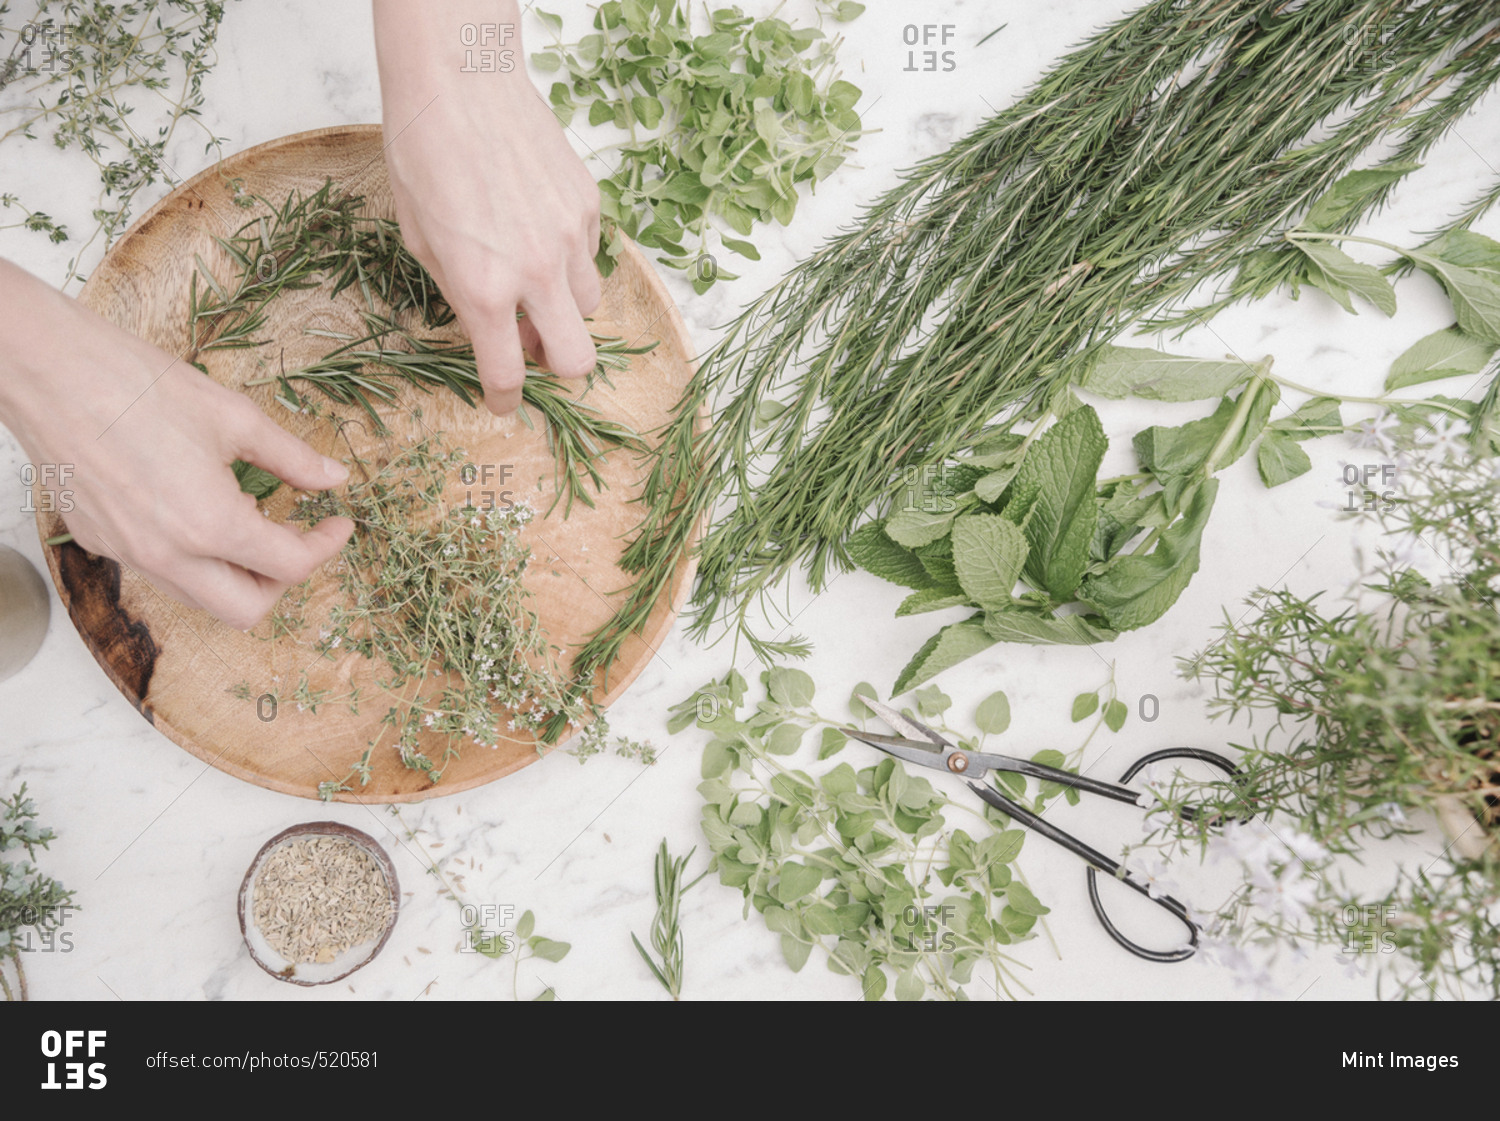 Overhead view of a woman preparing herbs and plants for use in cooking. Rosemary, chives, mint and coriander seeds.